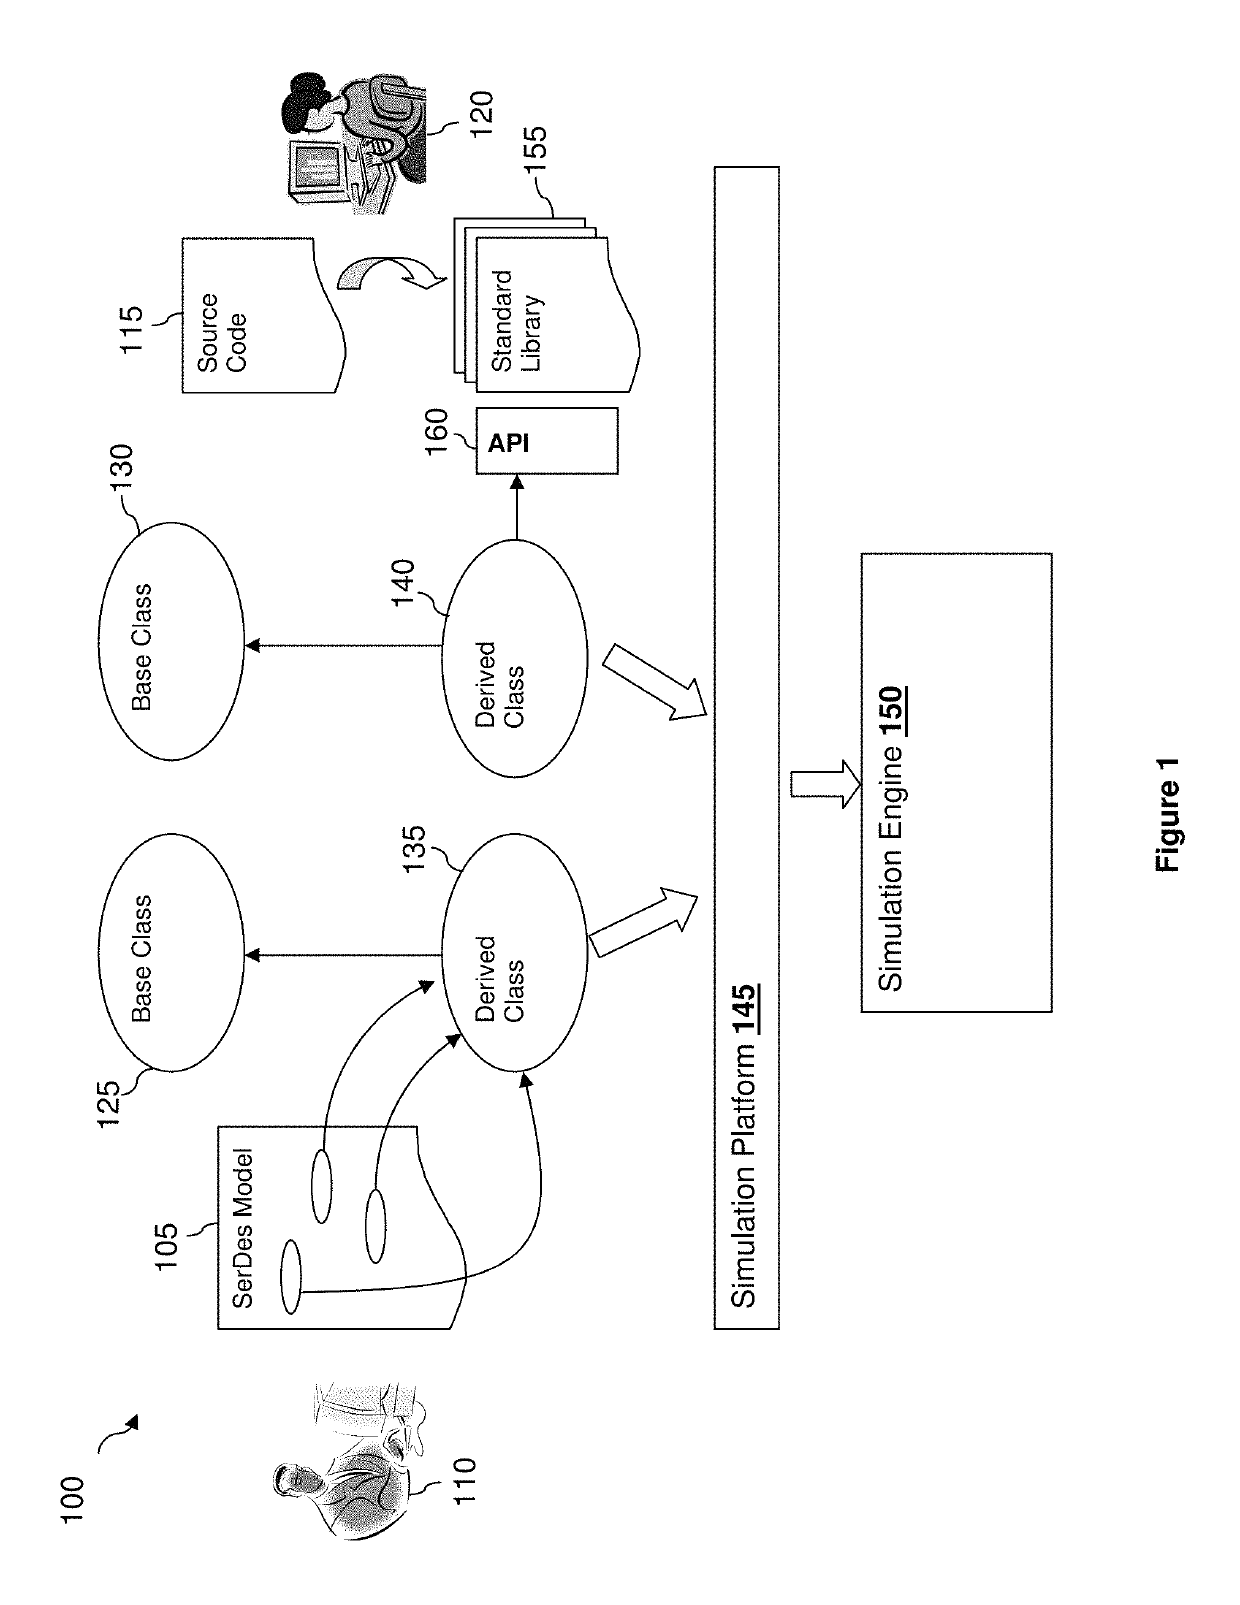 Methods and systems for simulating high-speed link designs